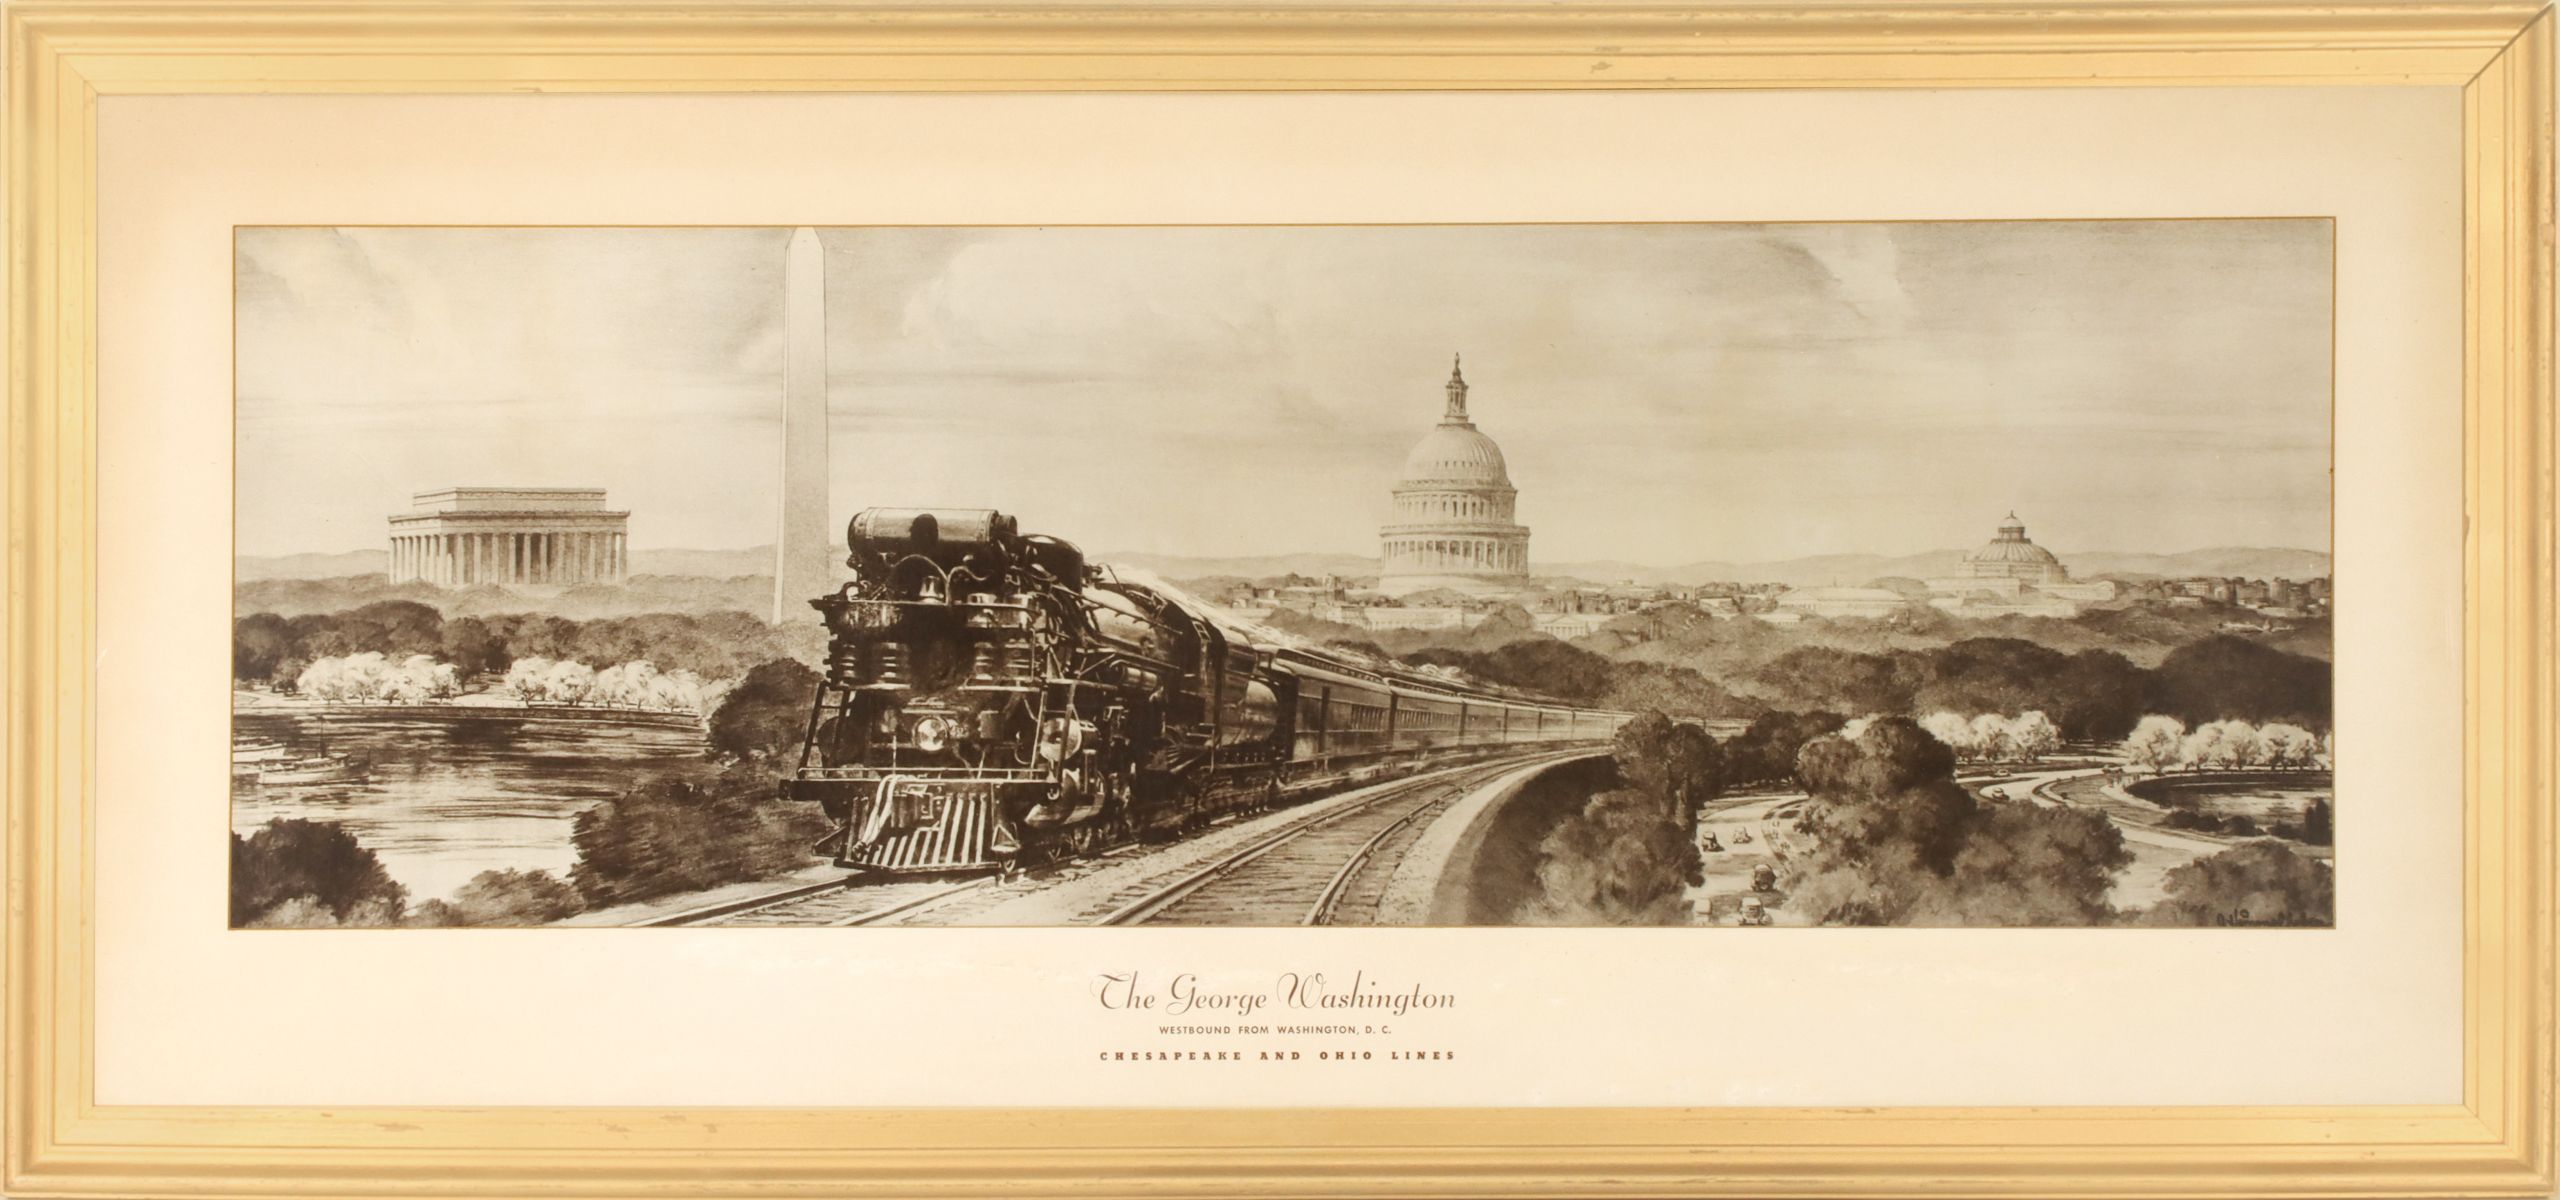 A C.&O.RY. ADVERTISING PRINT FOR THE GEORGE WASHINGTON